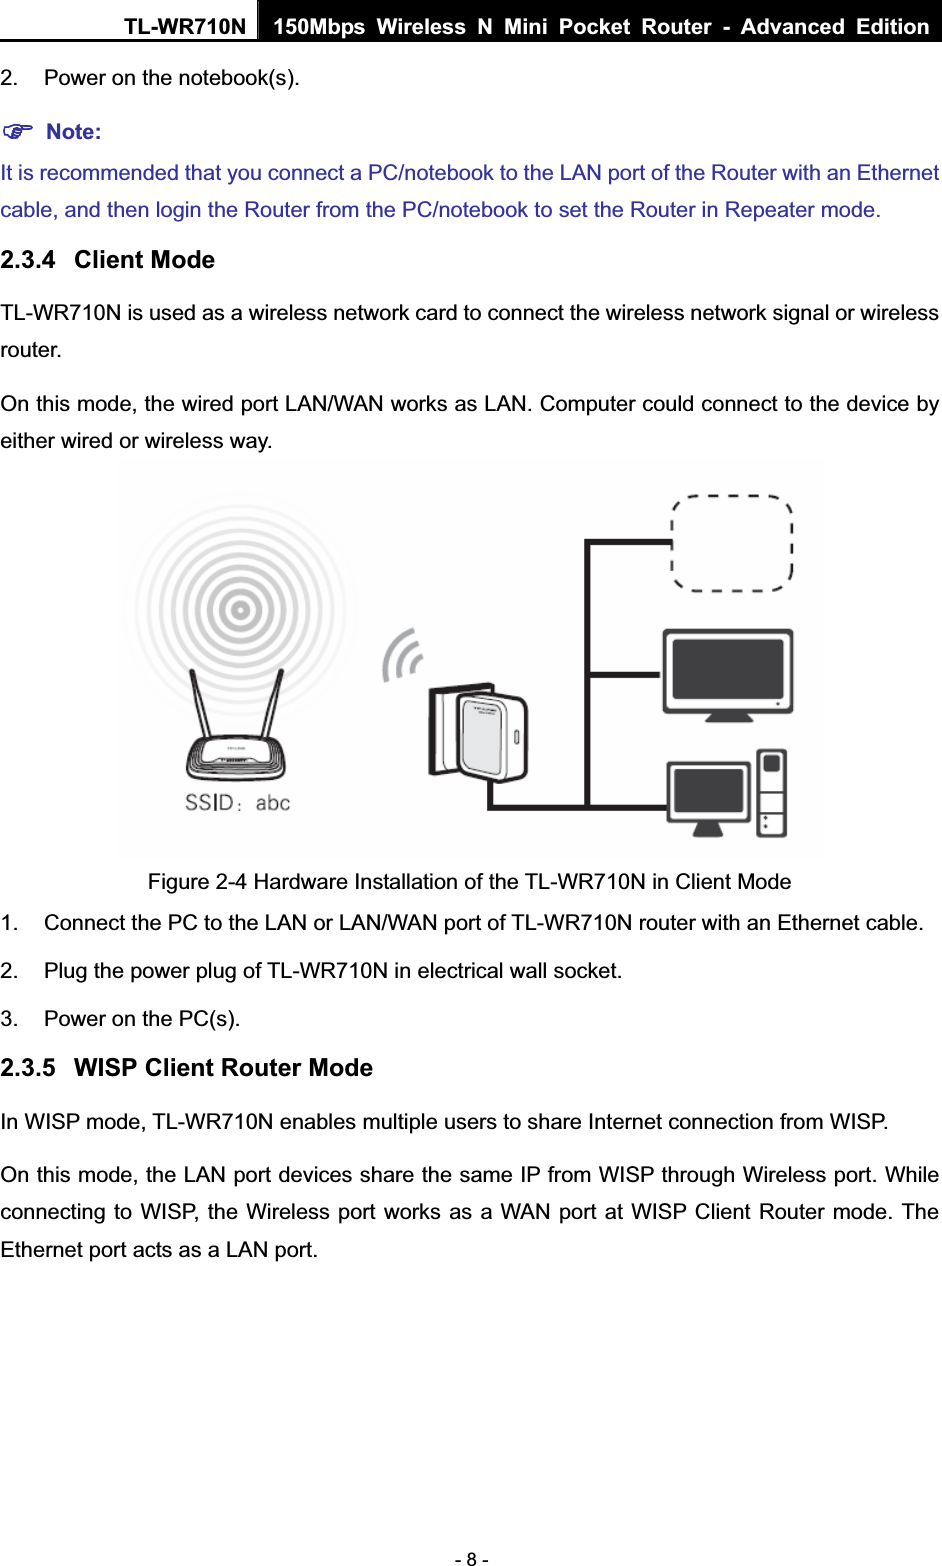 TL-WR710N  150Mbps Wireless N Mini Pocket Router - Advanced Edition- 8 - 2.  Power on the notebook(s). )Note:It is recommended that you connect a PC/notebook to the LAN port of the Router with an Ethernet cable, and then login the Router from the PC/notebook to set the Router in Repeater mode. 2.3.4 Client Mode TL-WR710N is used as a wireless network card to connect the wireless network signal or wireless router. On this mode, the wired port LAN/WAN works as LAN. Computer could connect to the device by either wired or wireless way. Figure 2-4 Hardware Installation of the TL-WR710N in Client Mode 1.  Connect the PC to the LAN or LAN/WAN port of TL-WR710N router with an Ethernet cable. 2.  Plug the power plug of TL-WR710N in electrical wall socket. 3.  Power on the PC(s). 2.3.5 WISP Client Router Mode In WISP mode, TL-WR710N enables multiple users to share Internet connection from WISP. On this mode, the LAN port devices share the same IP from WISP through Wireless port. While connecting to WISP, the Wireless port works as a WAN port at WISP Client Router mode. The Ethernet port acts as a LAN port. 